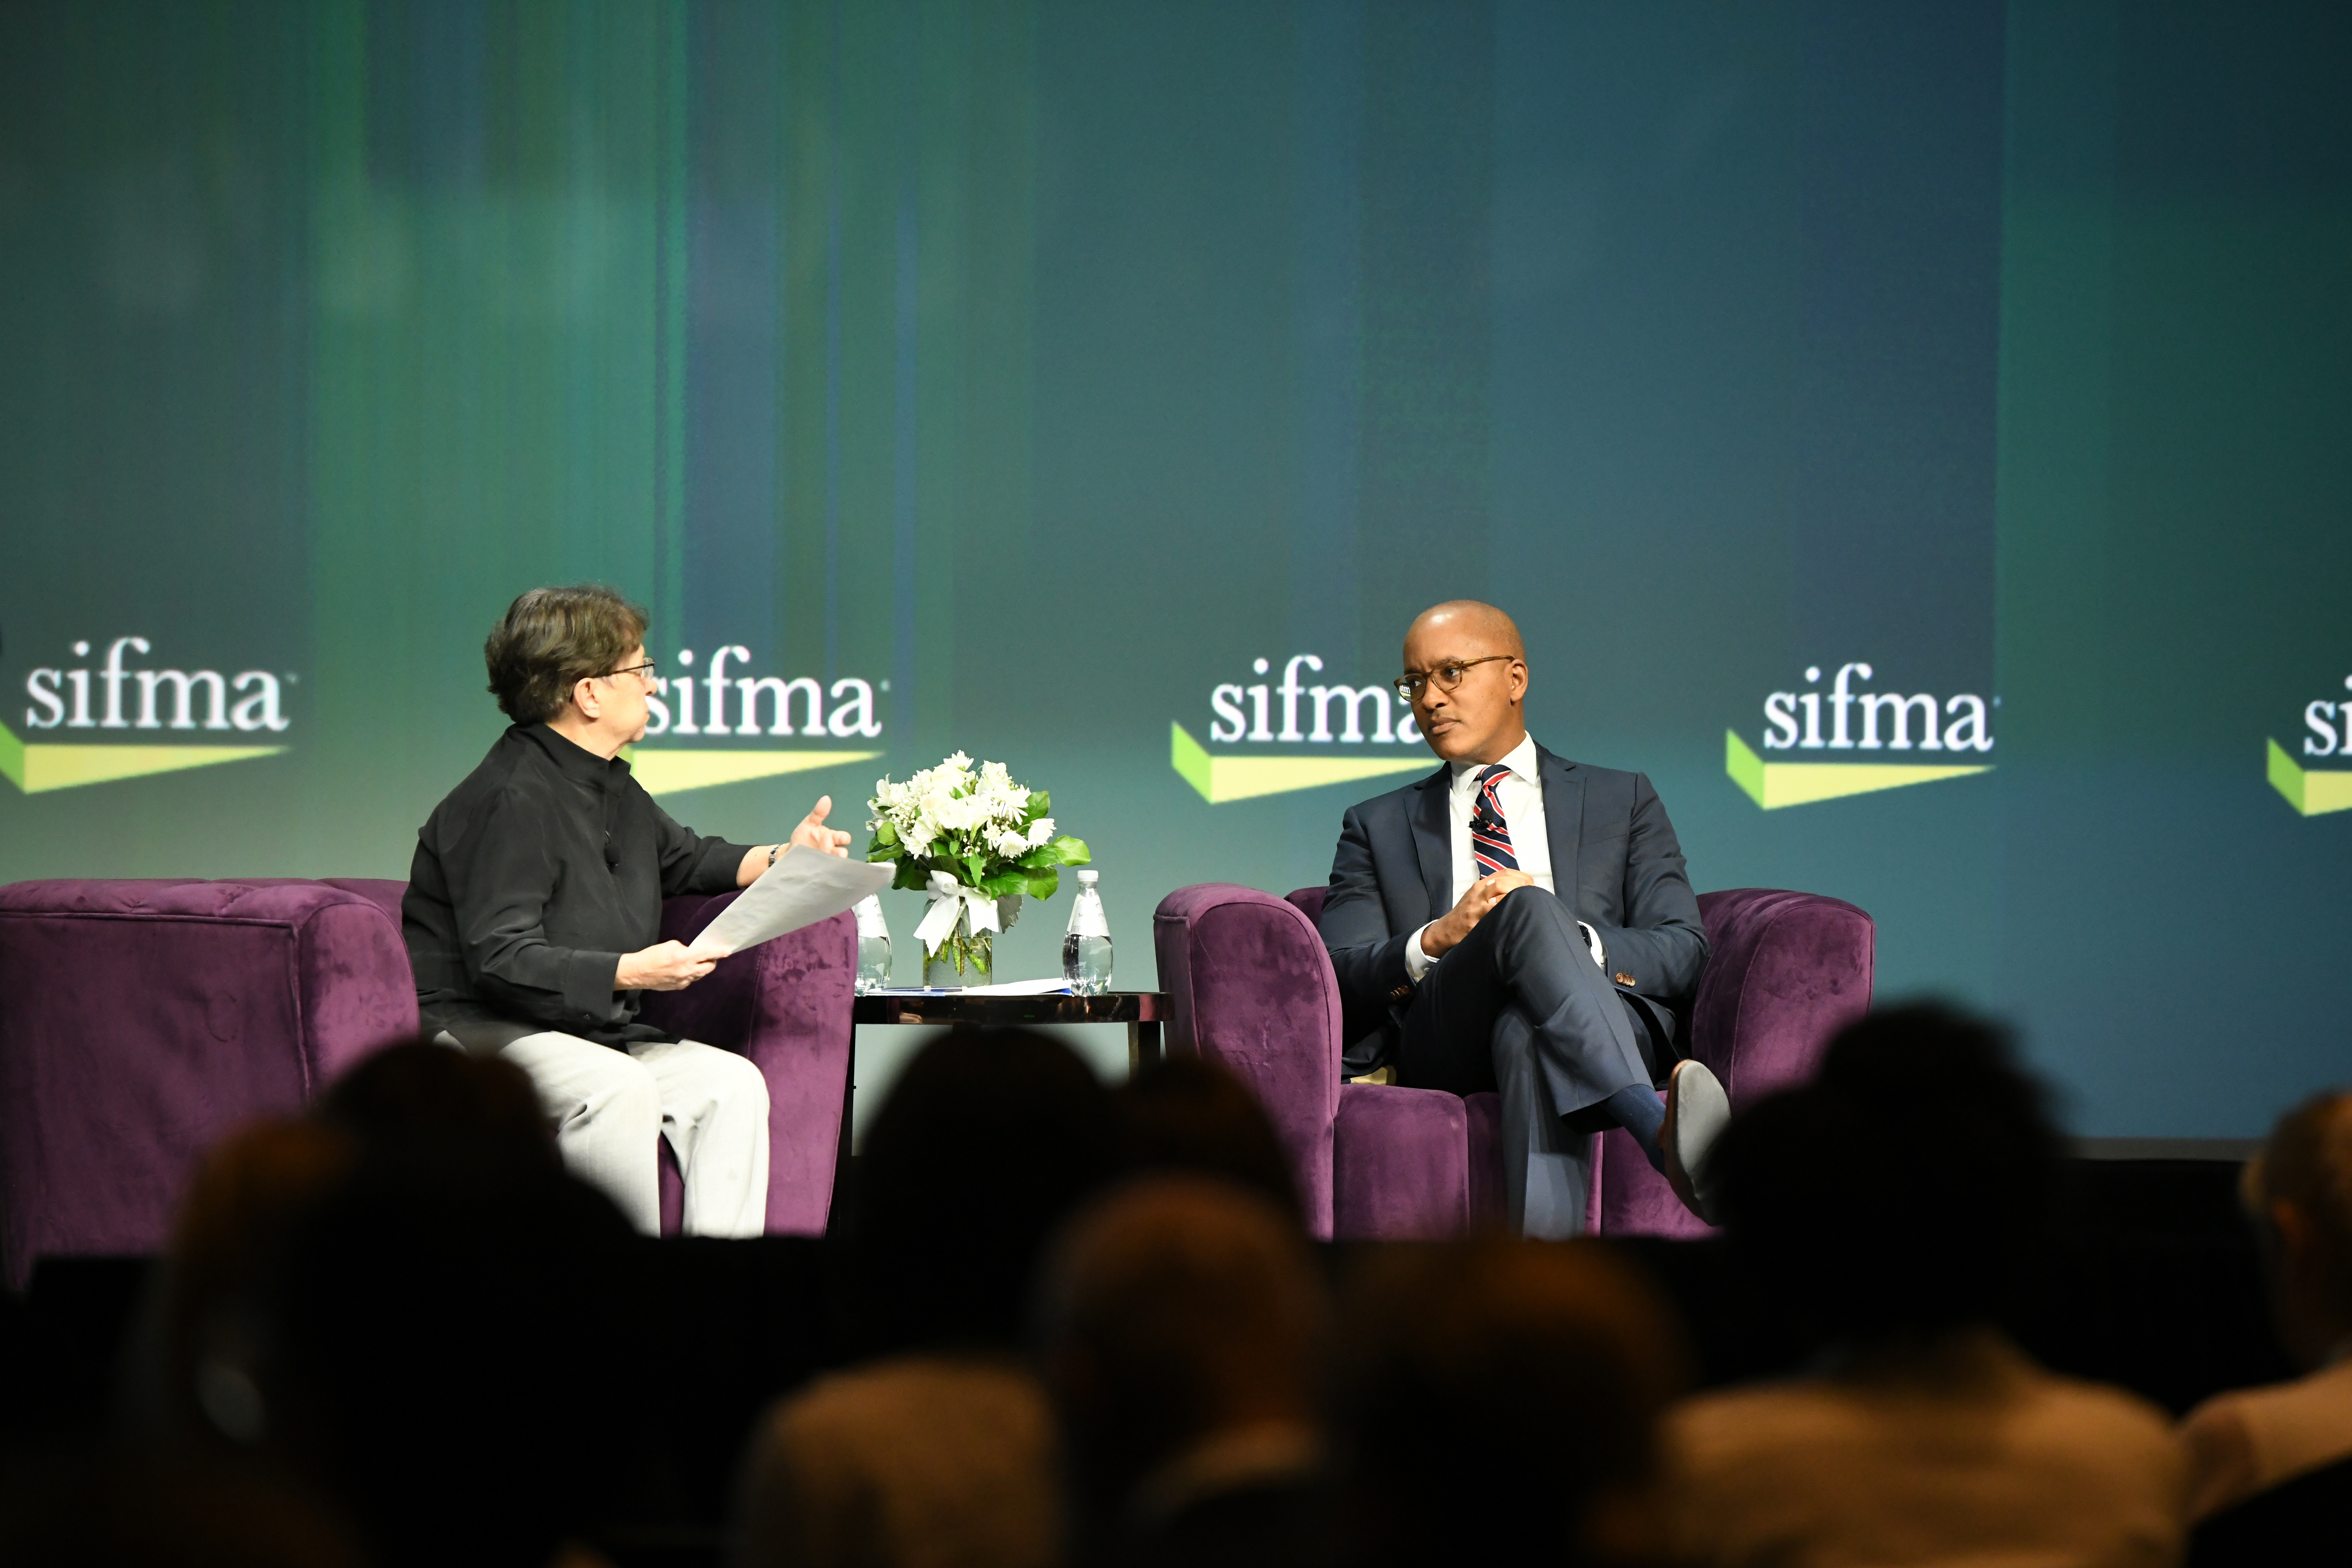 U.S. Attorney Damian Williams and former SDNY U.S. Attorney Mary Jo White speaking at SIFMA’s Compliance and Legal Seminar